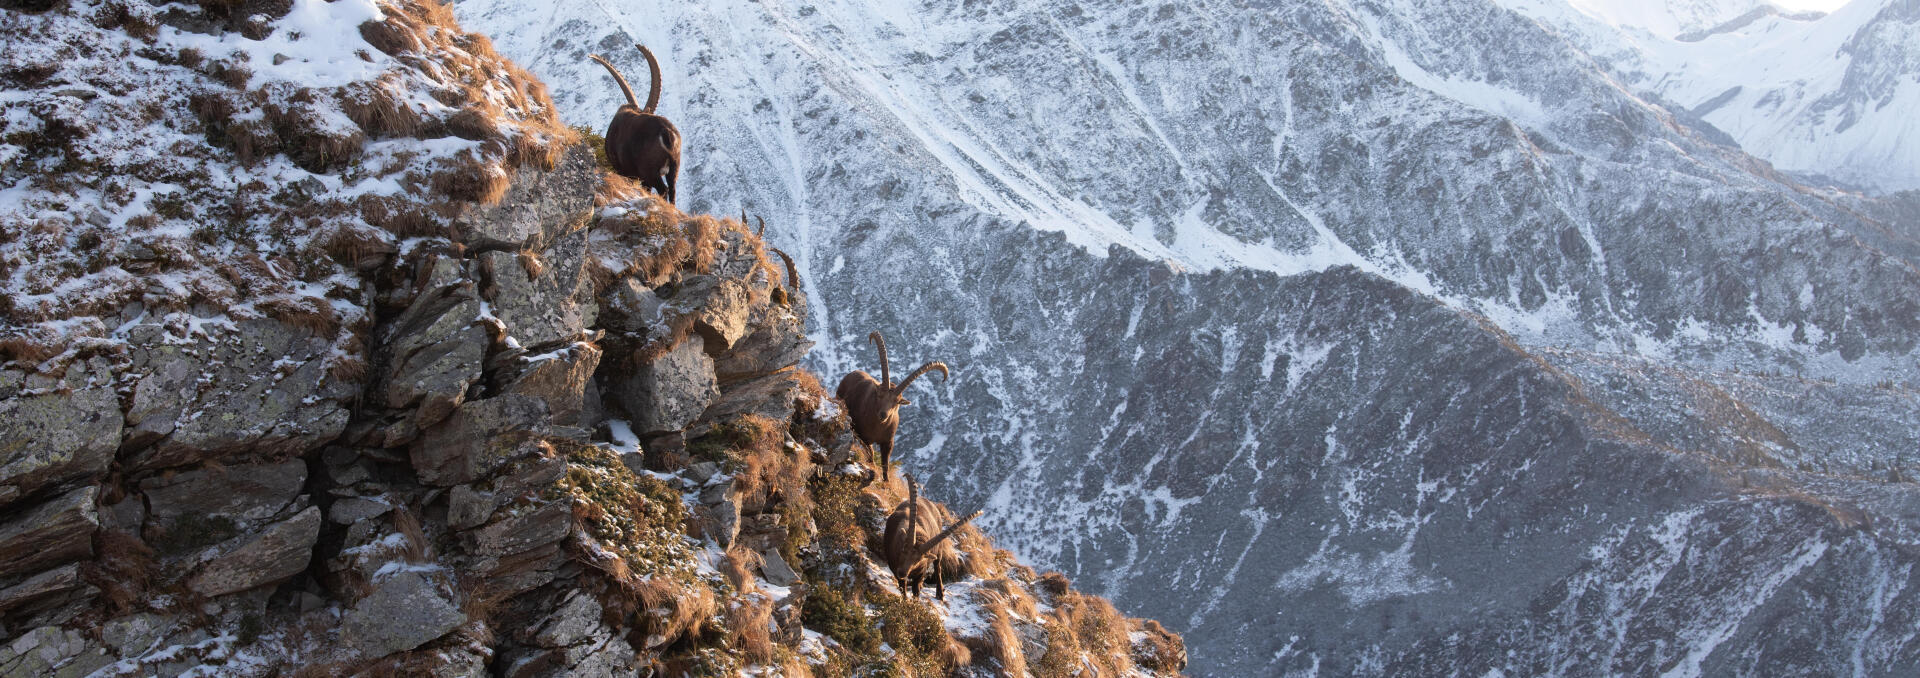 What's the difference between an ibex and a chamois? - Alpenwild